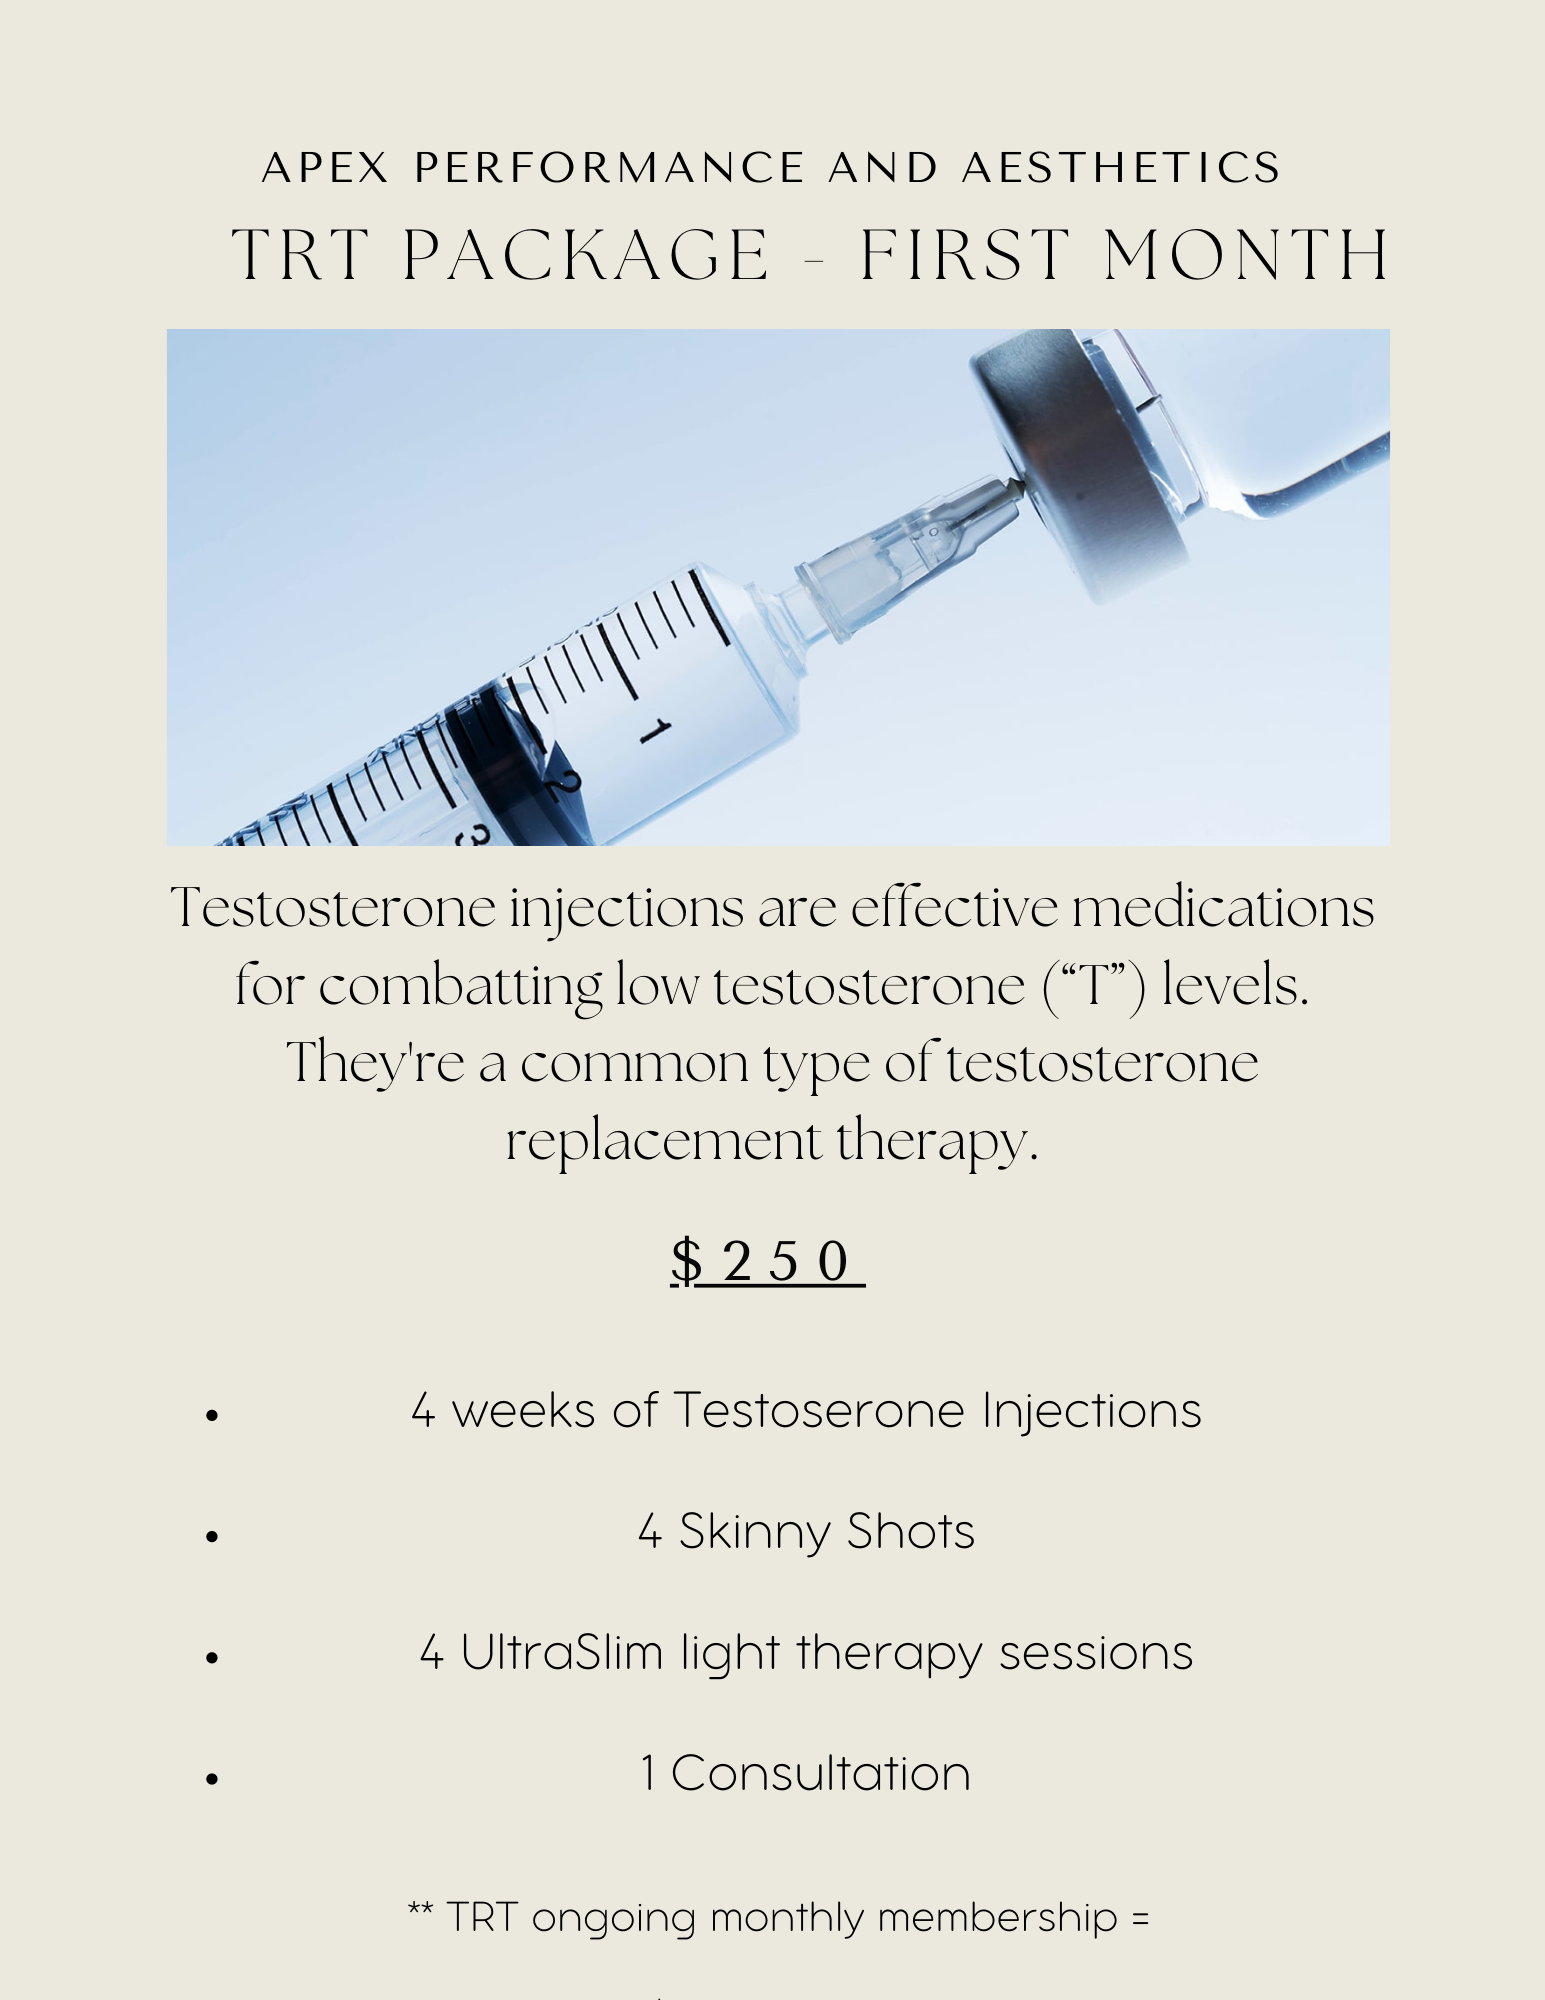 TRT Package - First Month | APEX Performance & Aesthetics in Sandy, UT